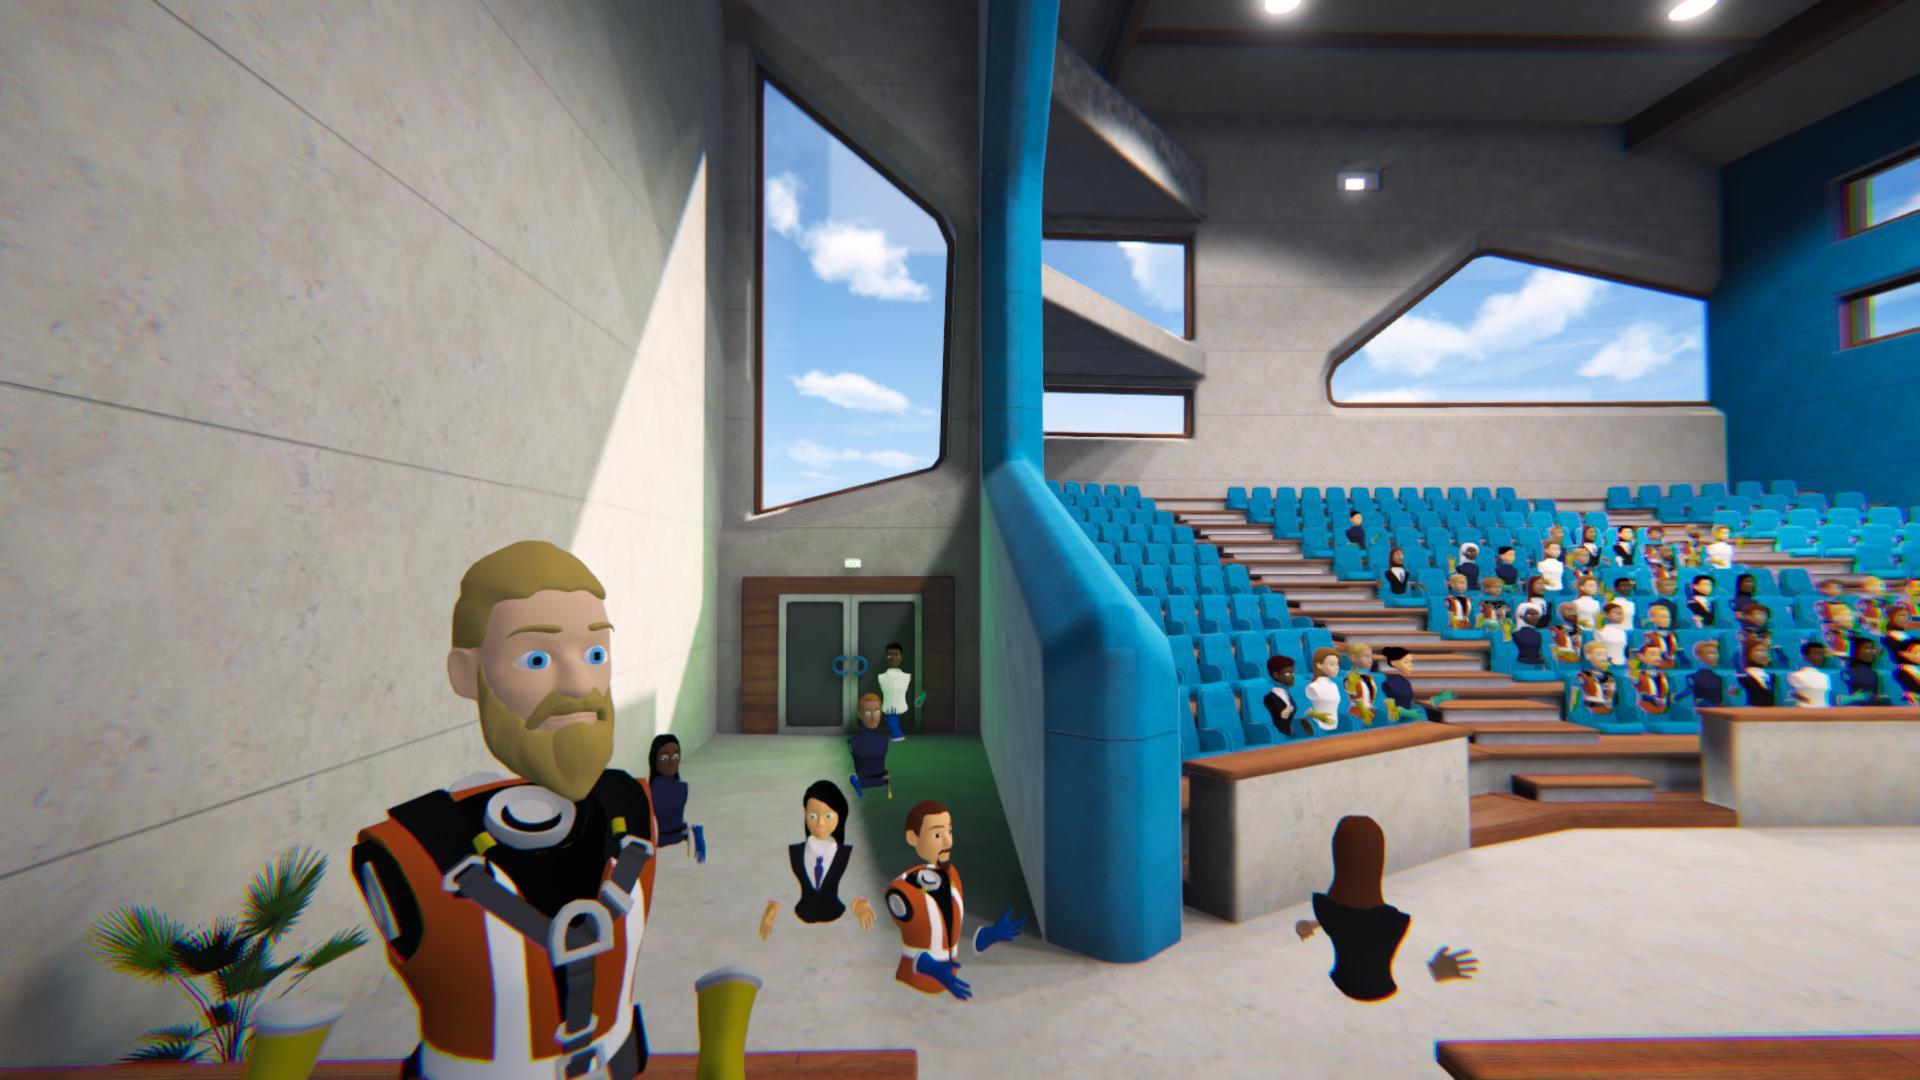 Immersive virtual campus conference room